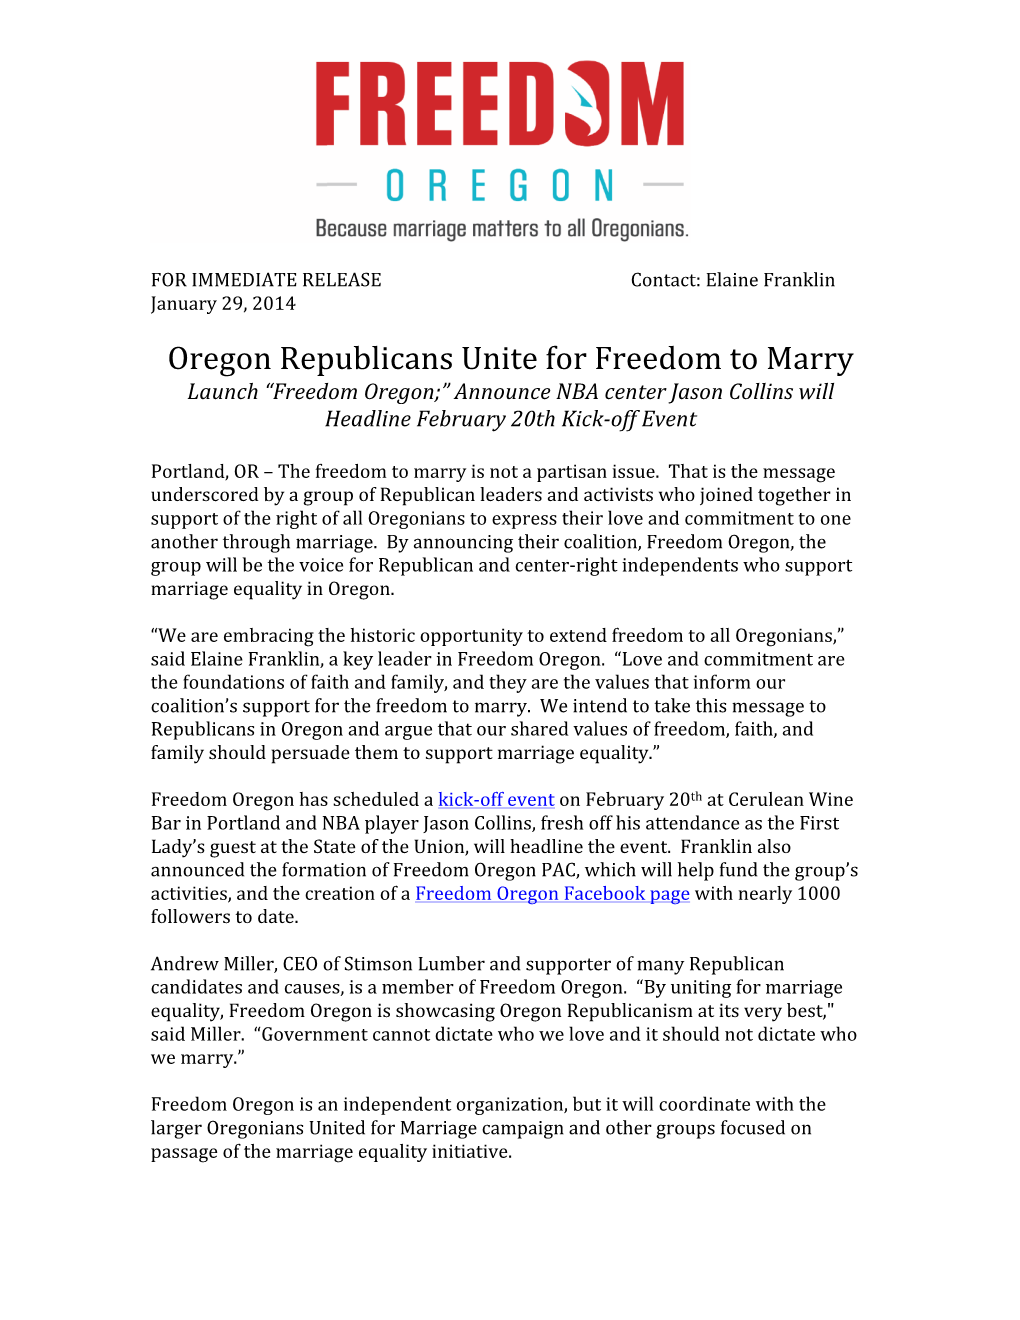 Oregon Republicans Unite for Freedom to Marry Launch “Freedom Oregon;” Announce NBA Center Jason Collins Will Headline February 20Th Kick-Off Event